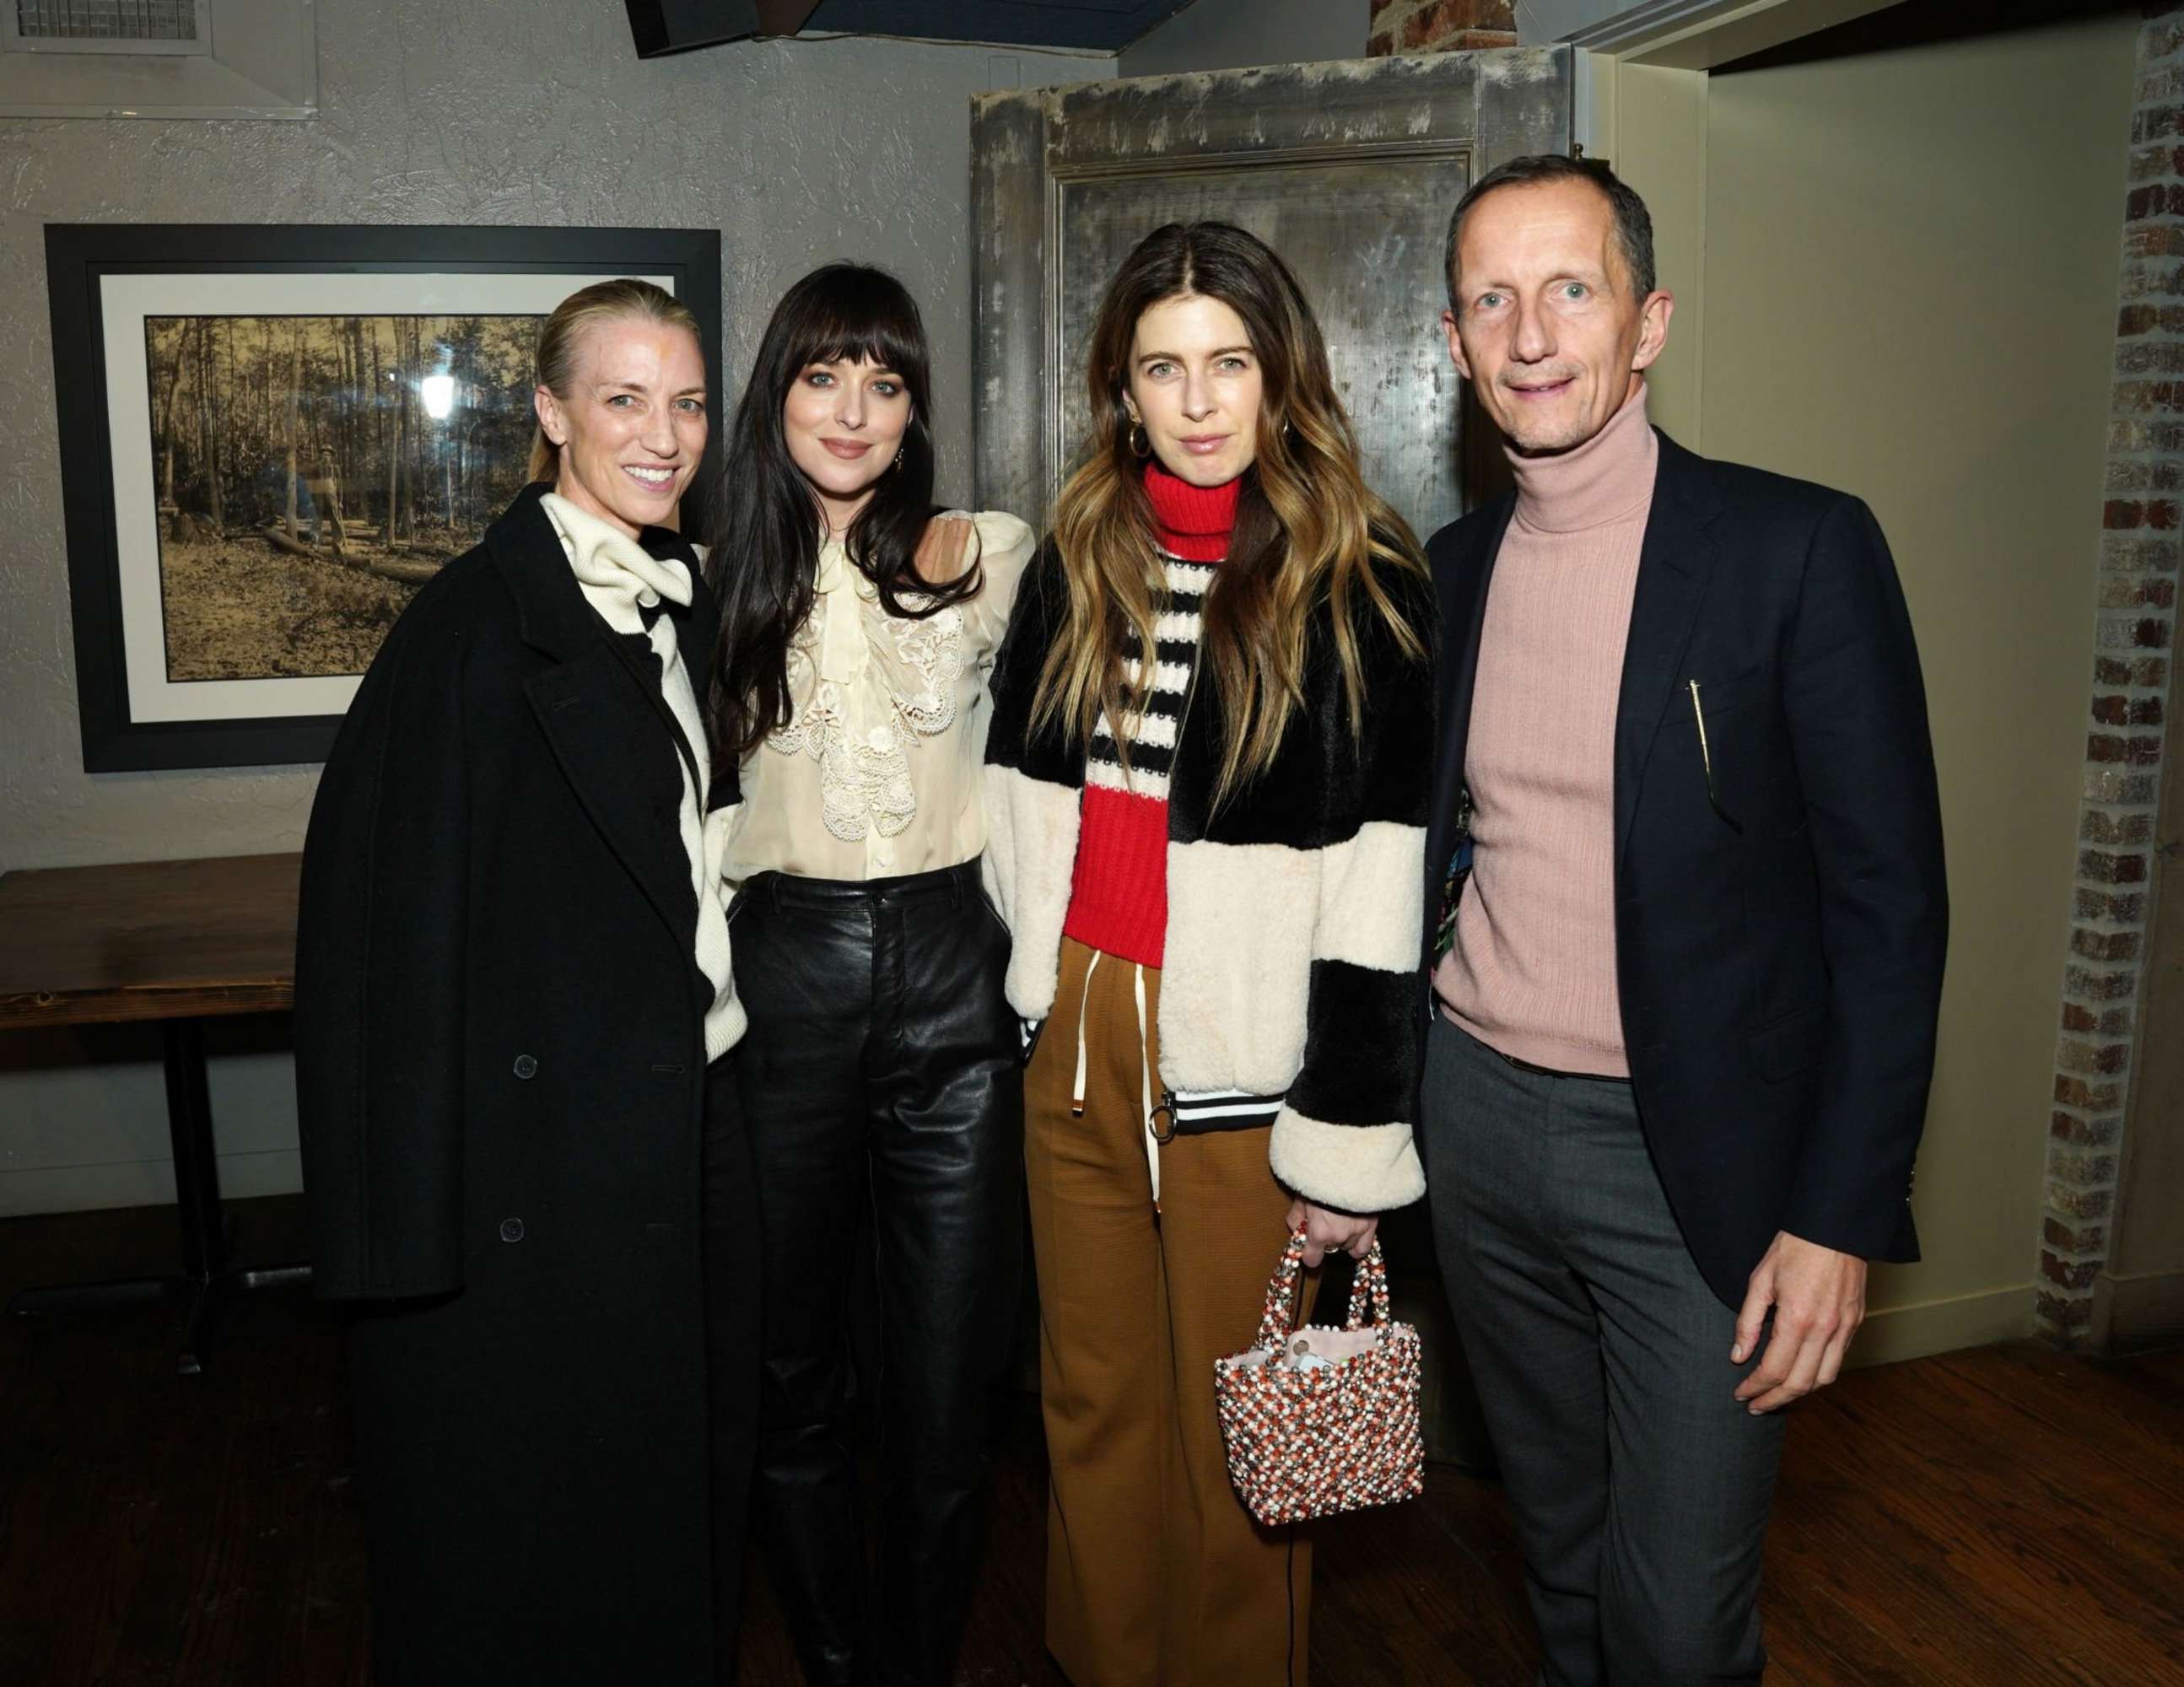 Gucci_Celebrates_the_Premiere_of_Bethann_Hardison___Frederic_Tcheng_s_Invisible_Beauty_at_the_Sundance_Film_Festival_28429.jpg